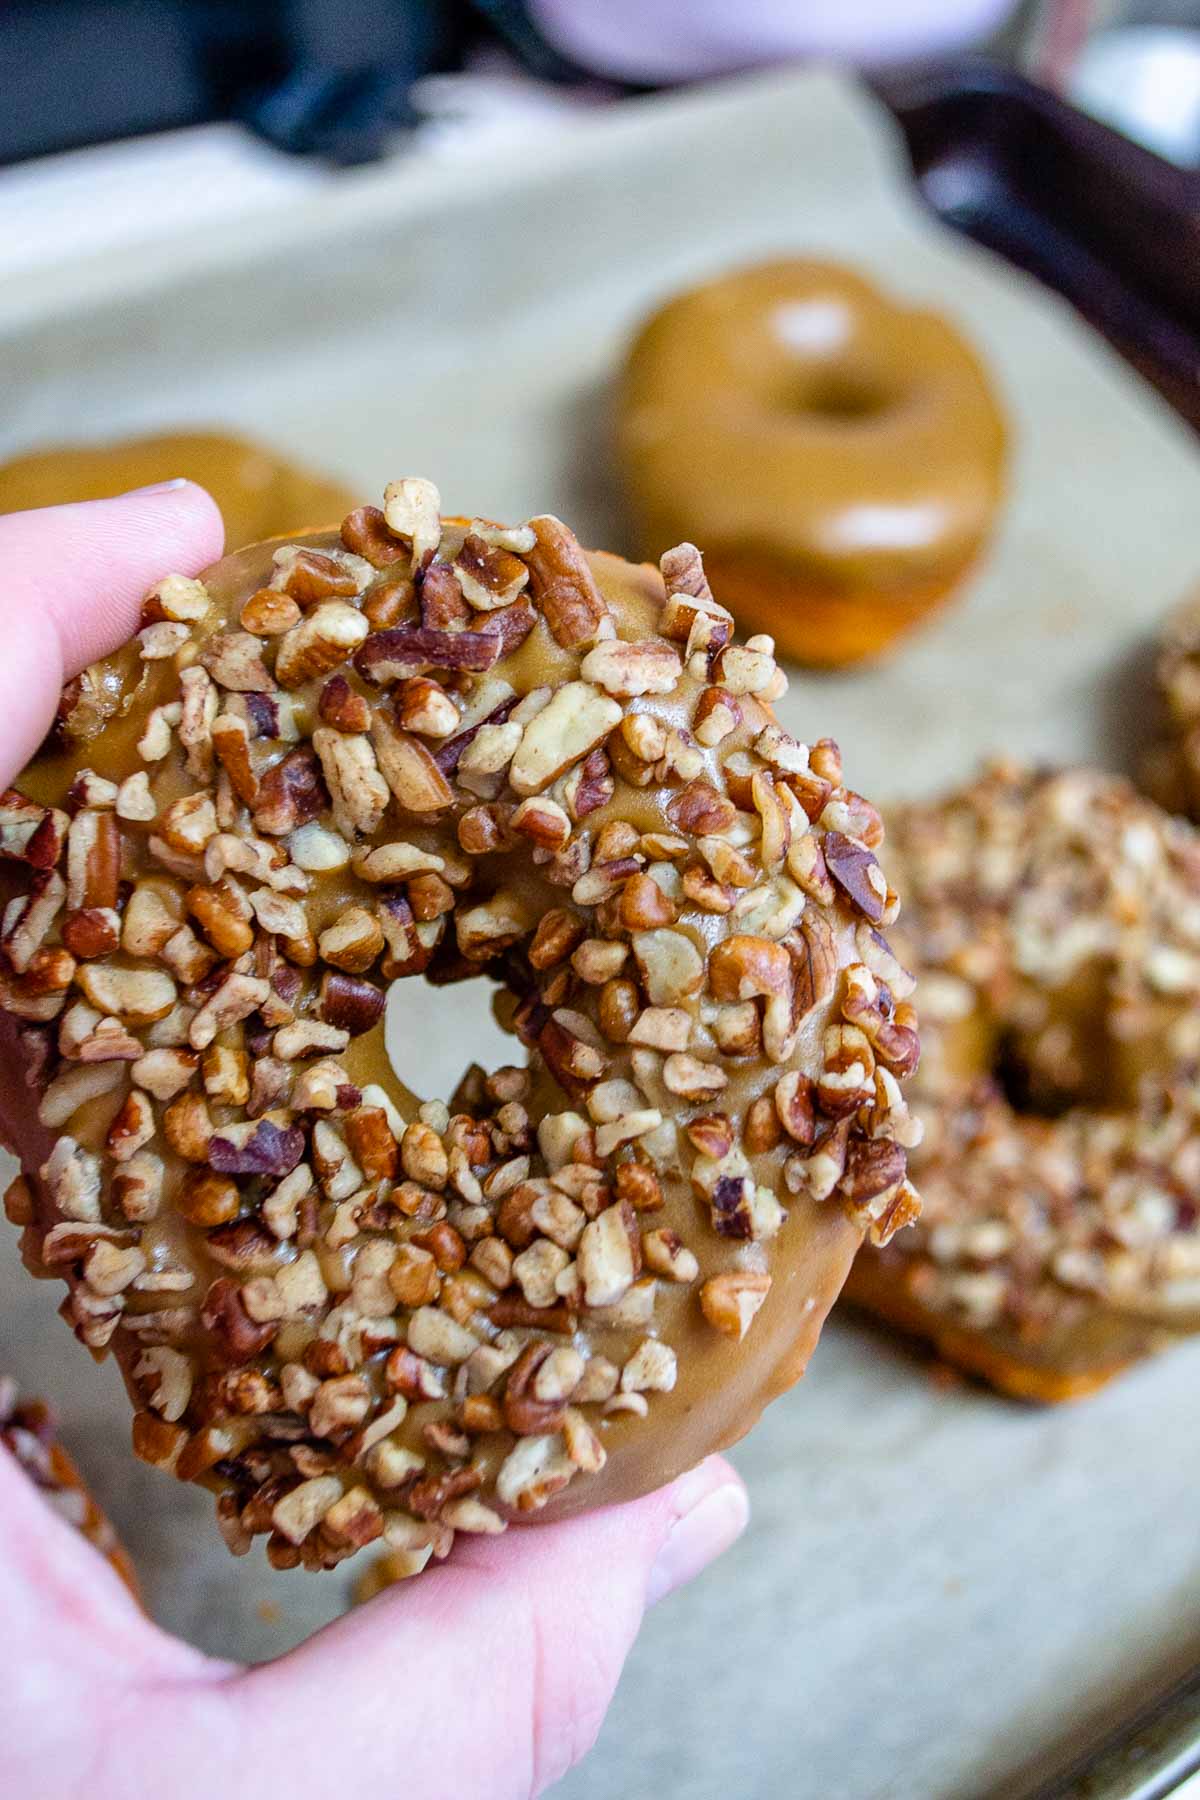 Caramel donut with crushed pecans